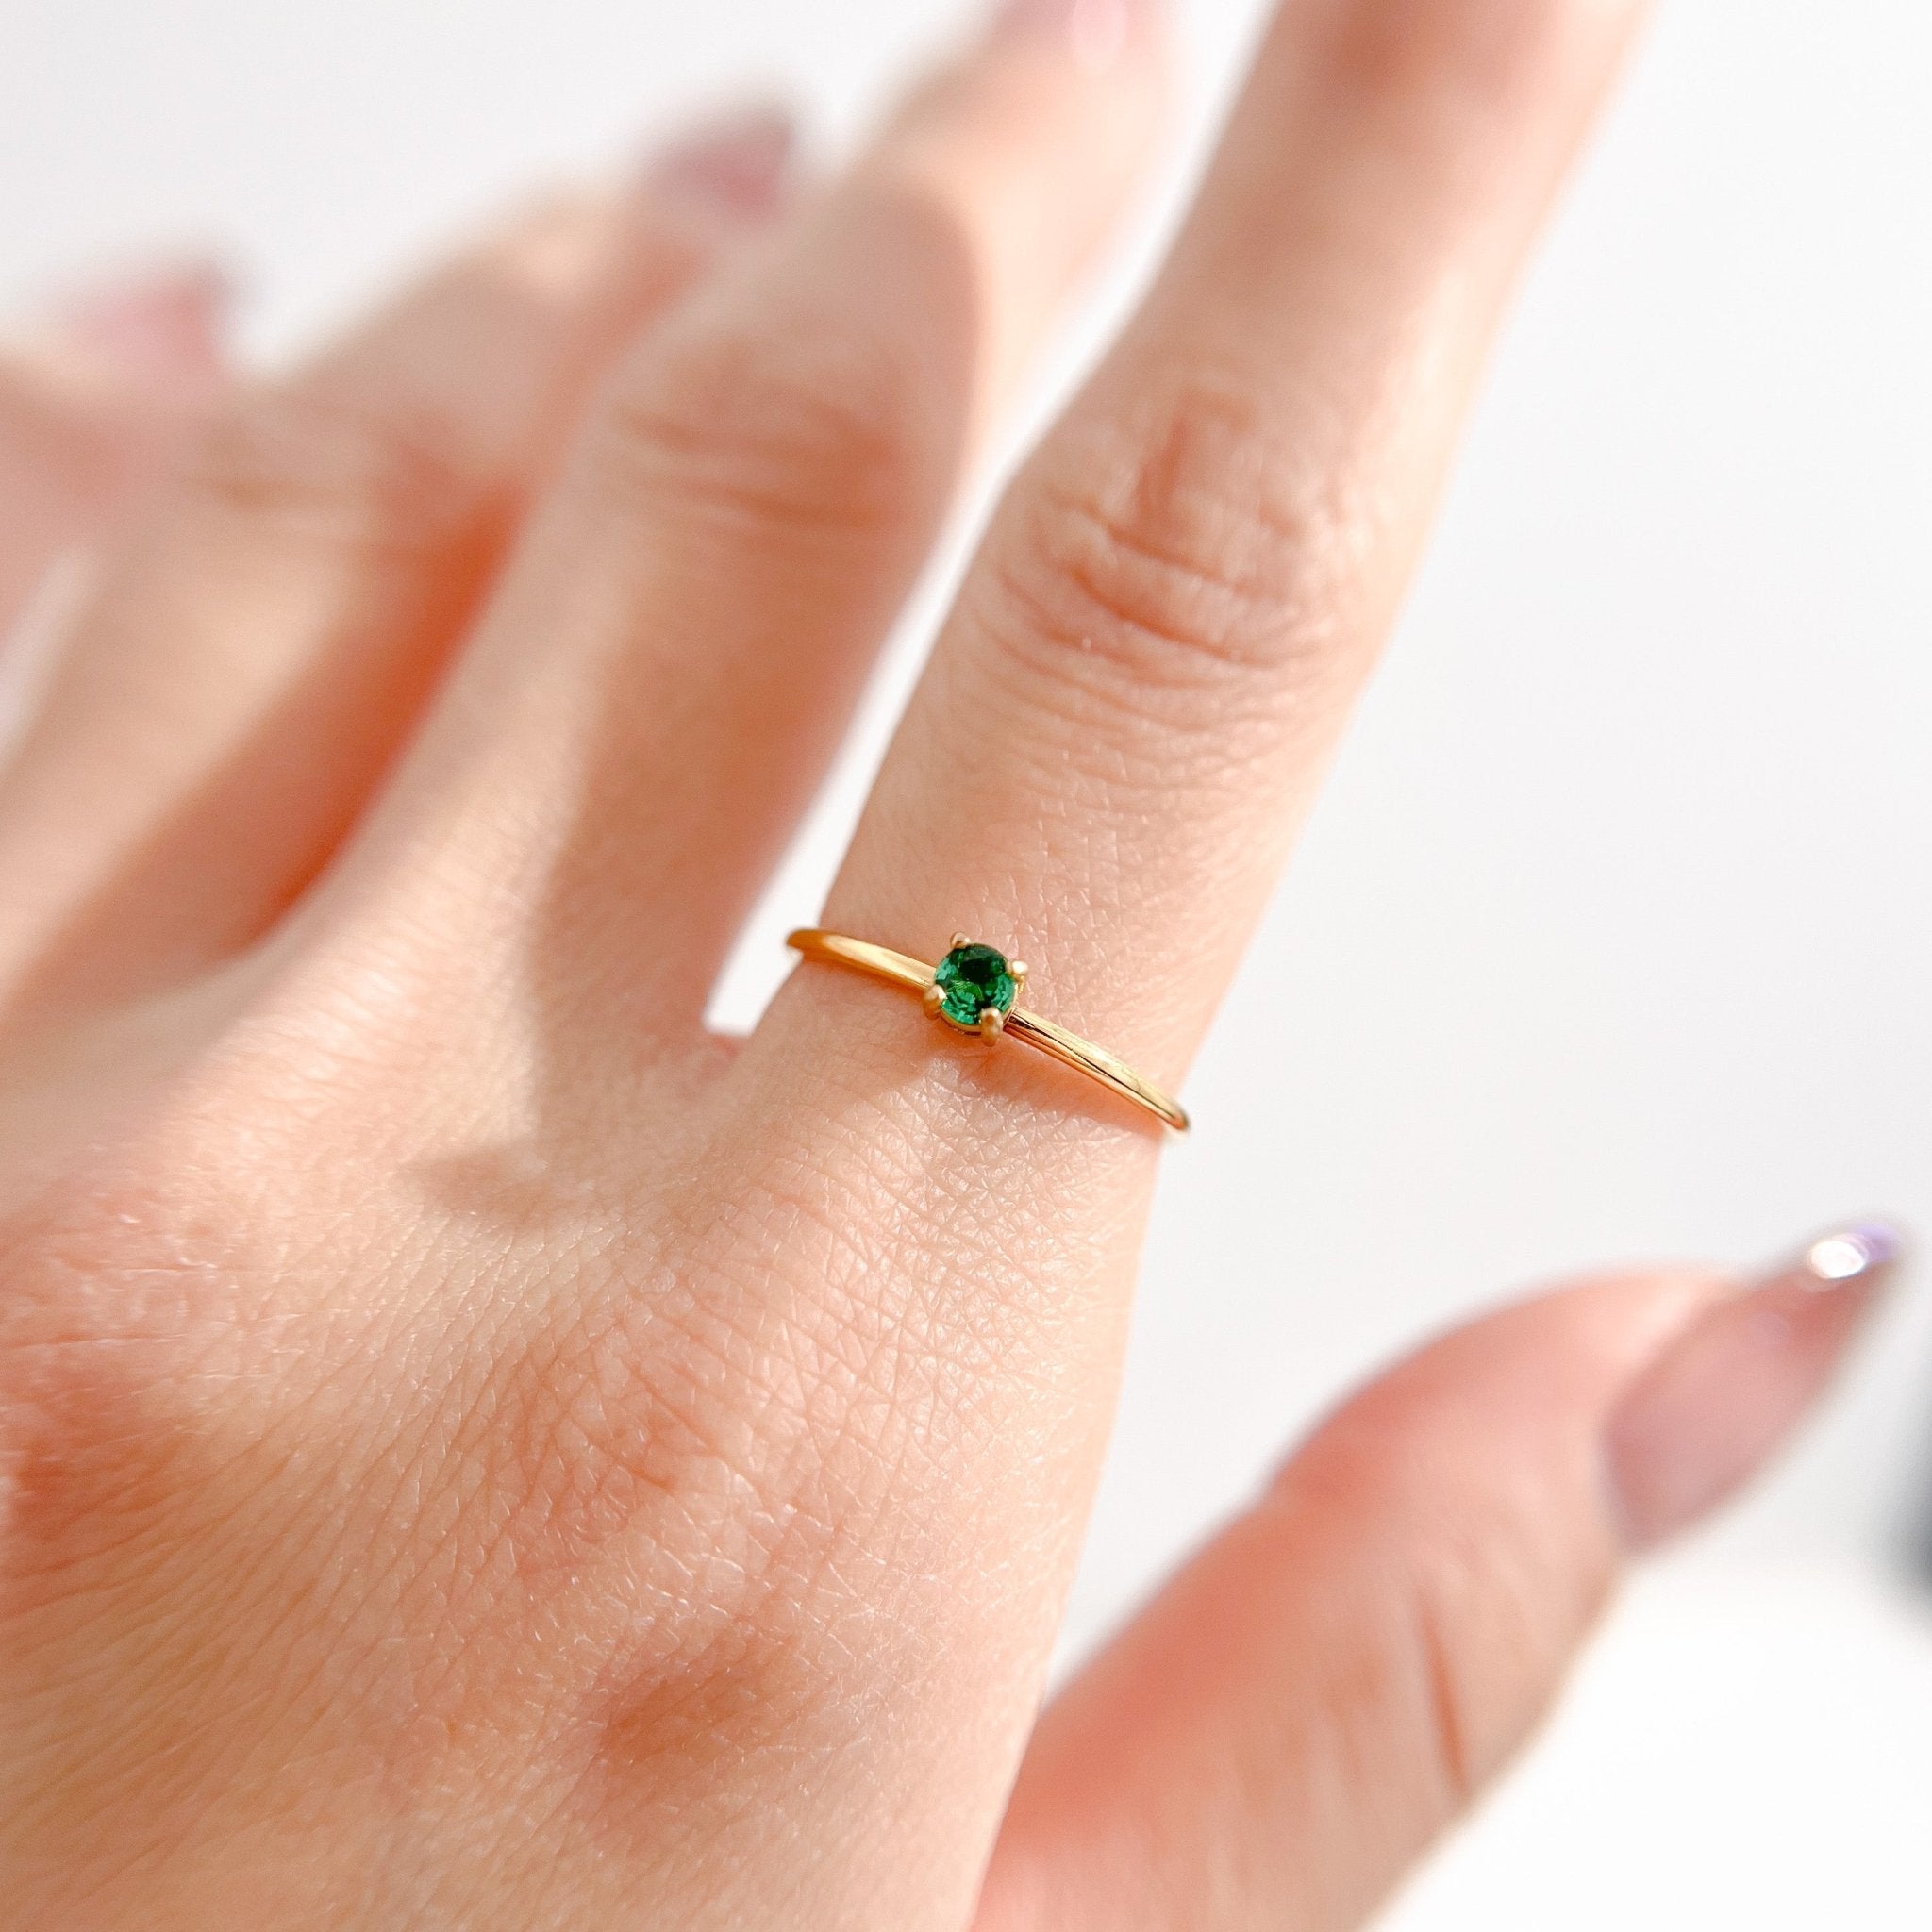 Mini Single Green Gem Ring in Gold - Flaire & Co.